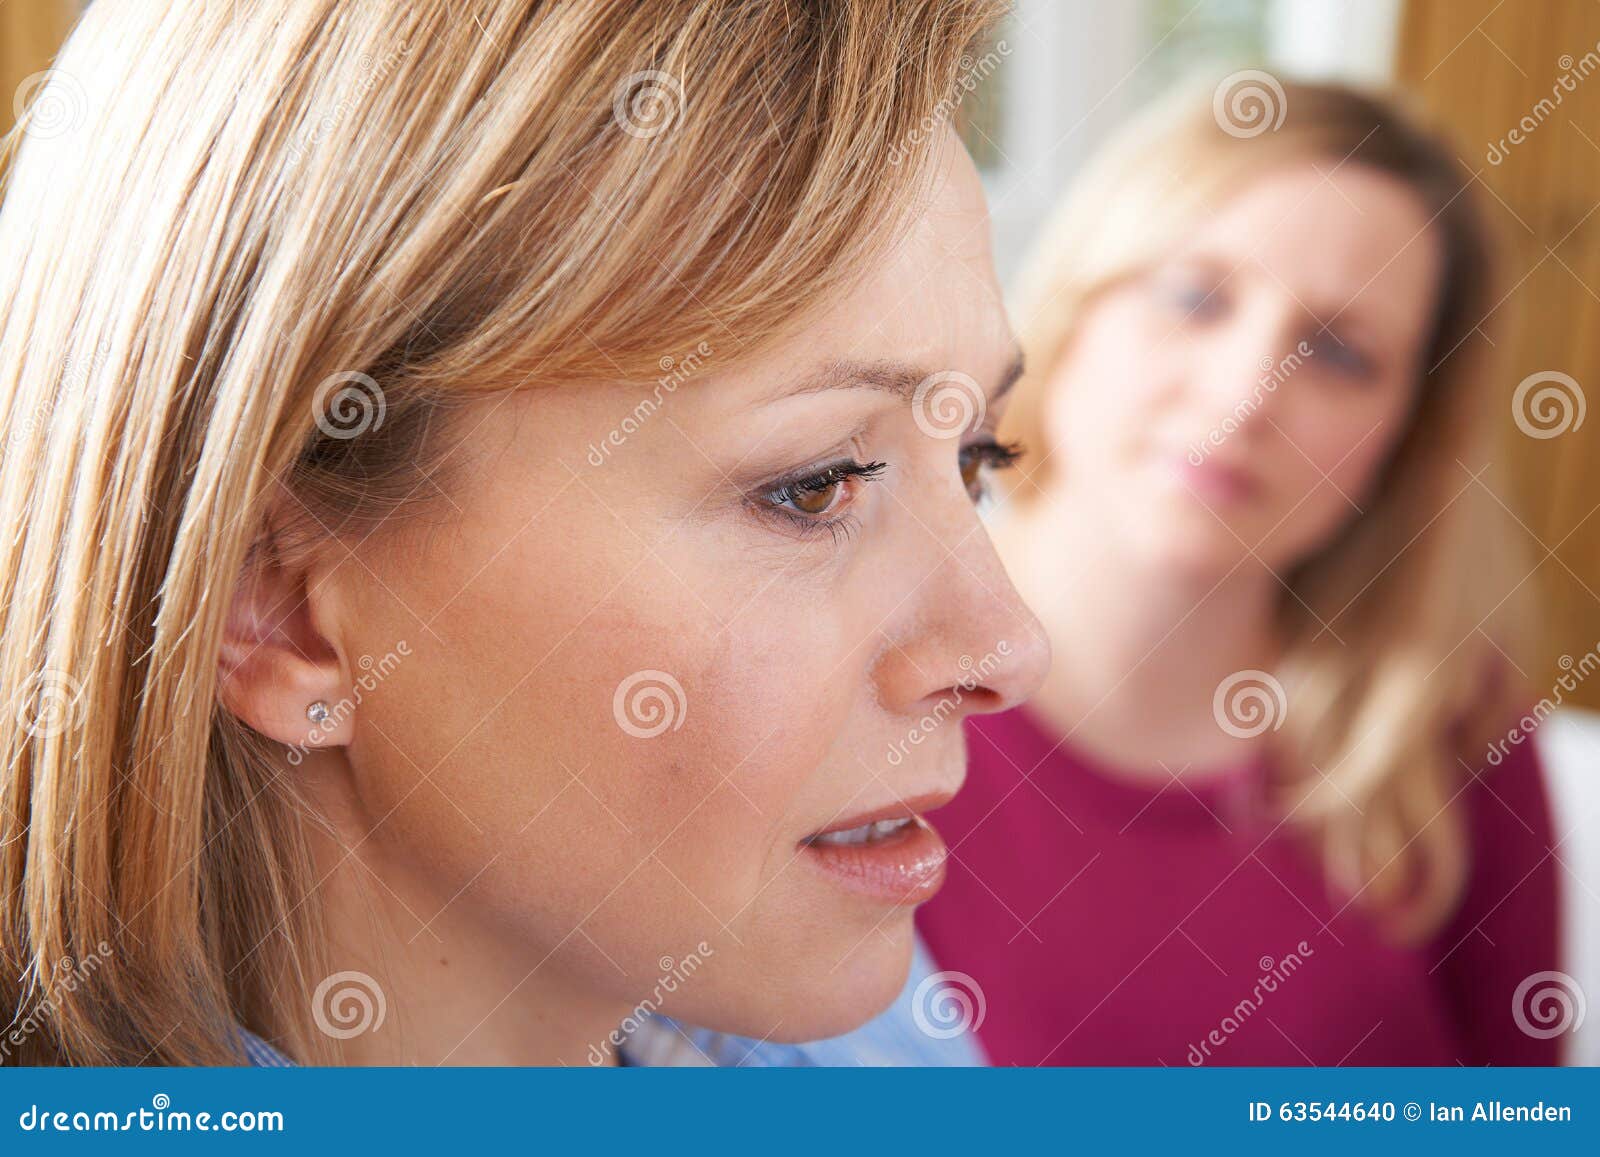 unhappy woman in conversation with friend or counsellor